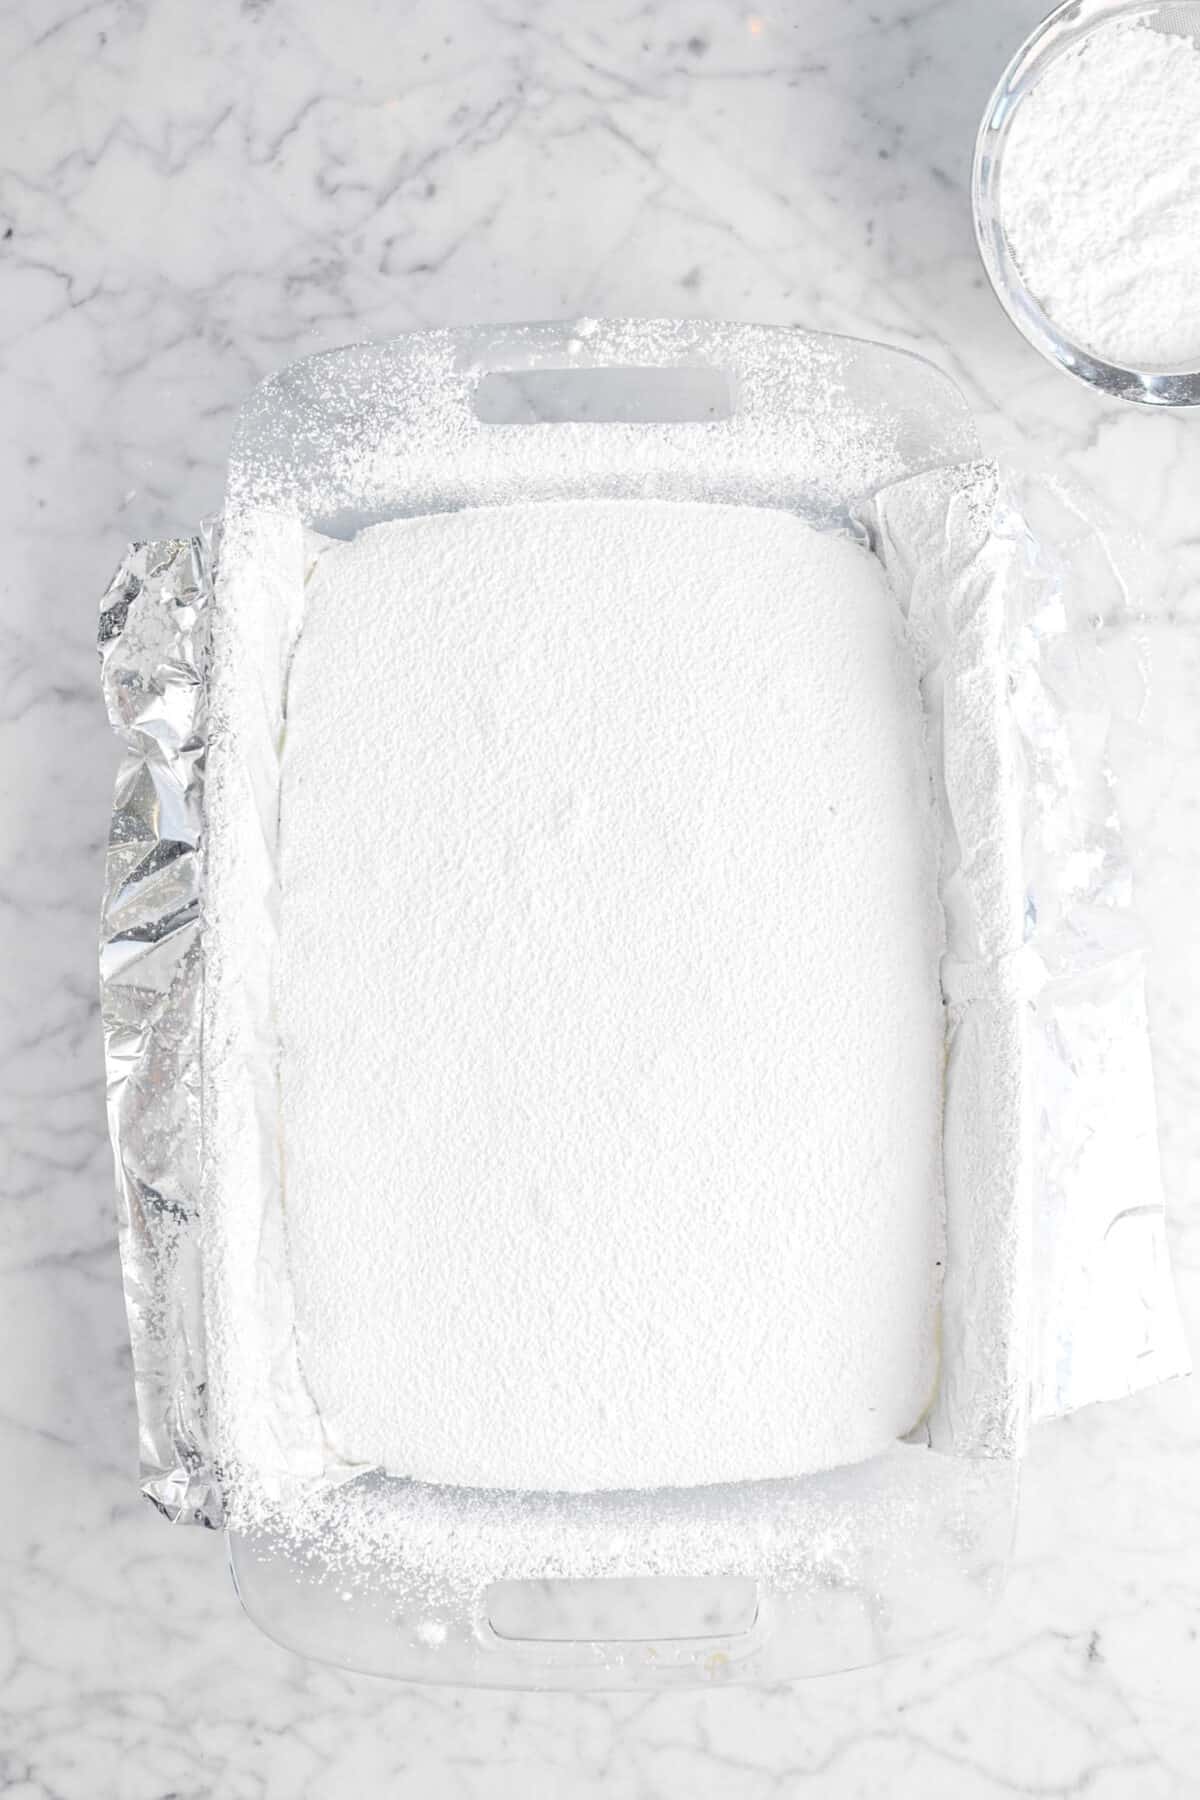 powdered sugar sifted on top of marshmallow mixture